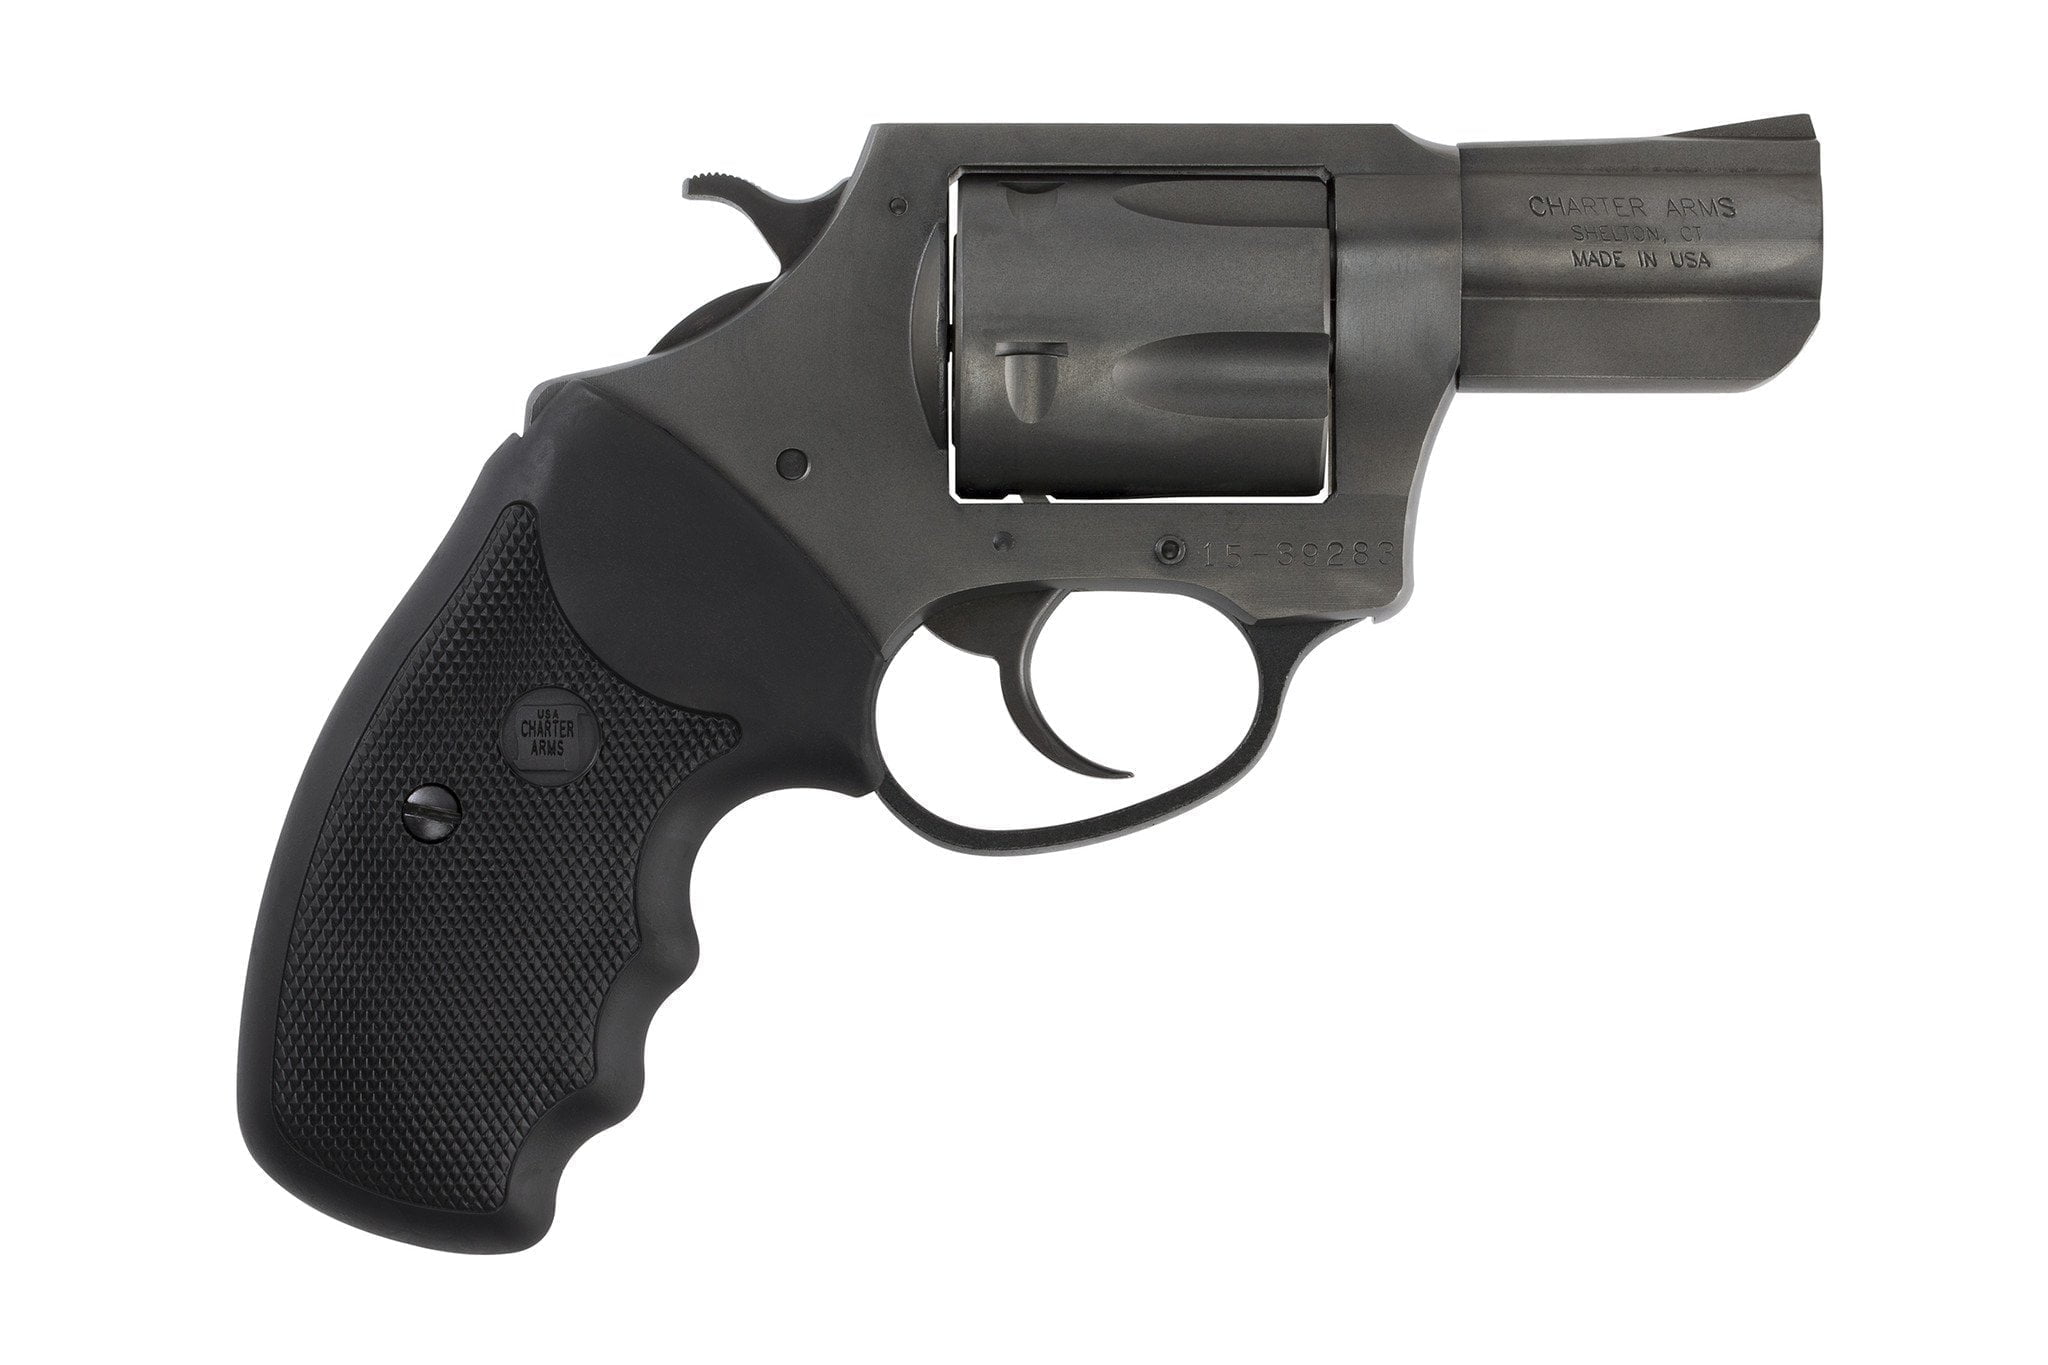 Charter Arms Pitbull Nitride finish a concealed carry gun with a